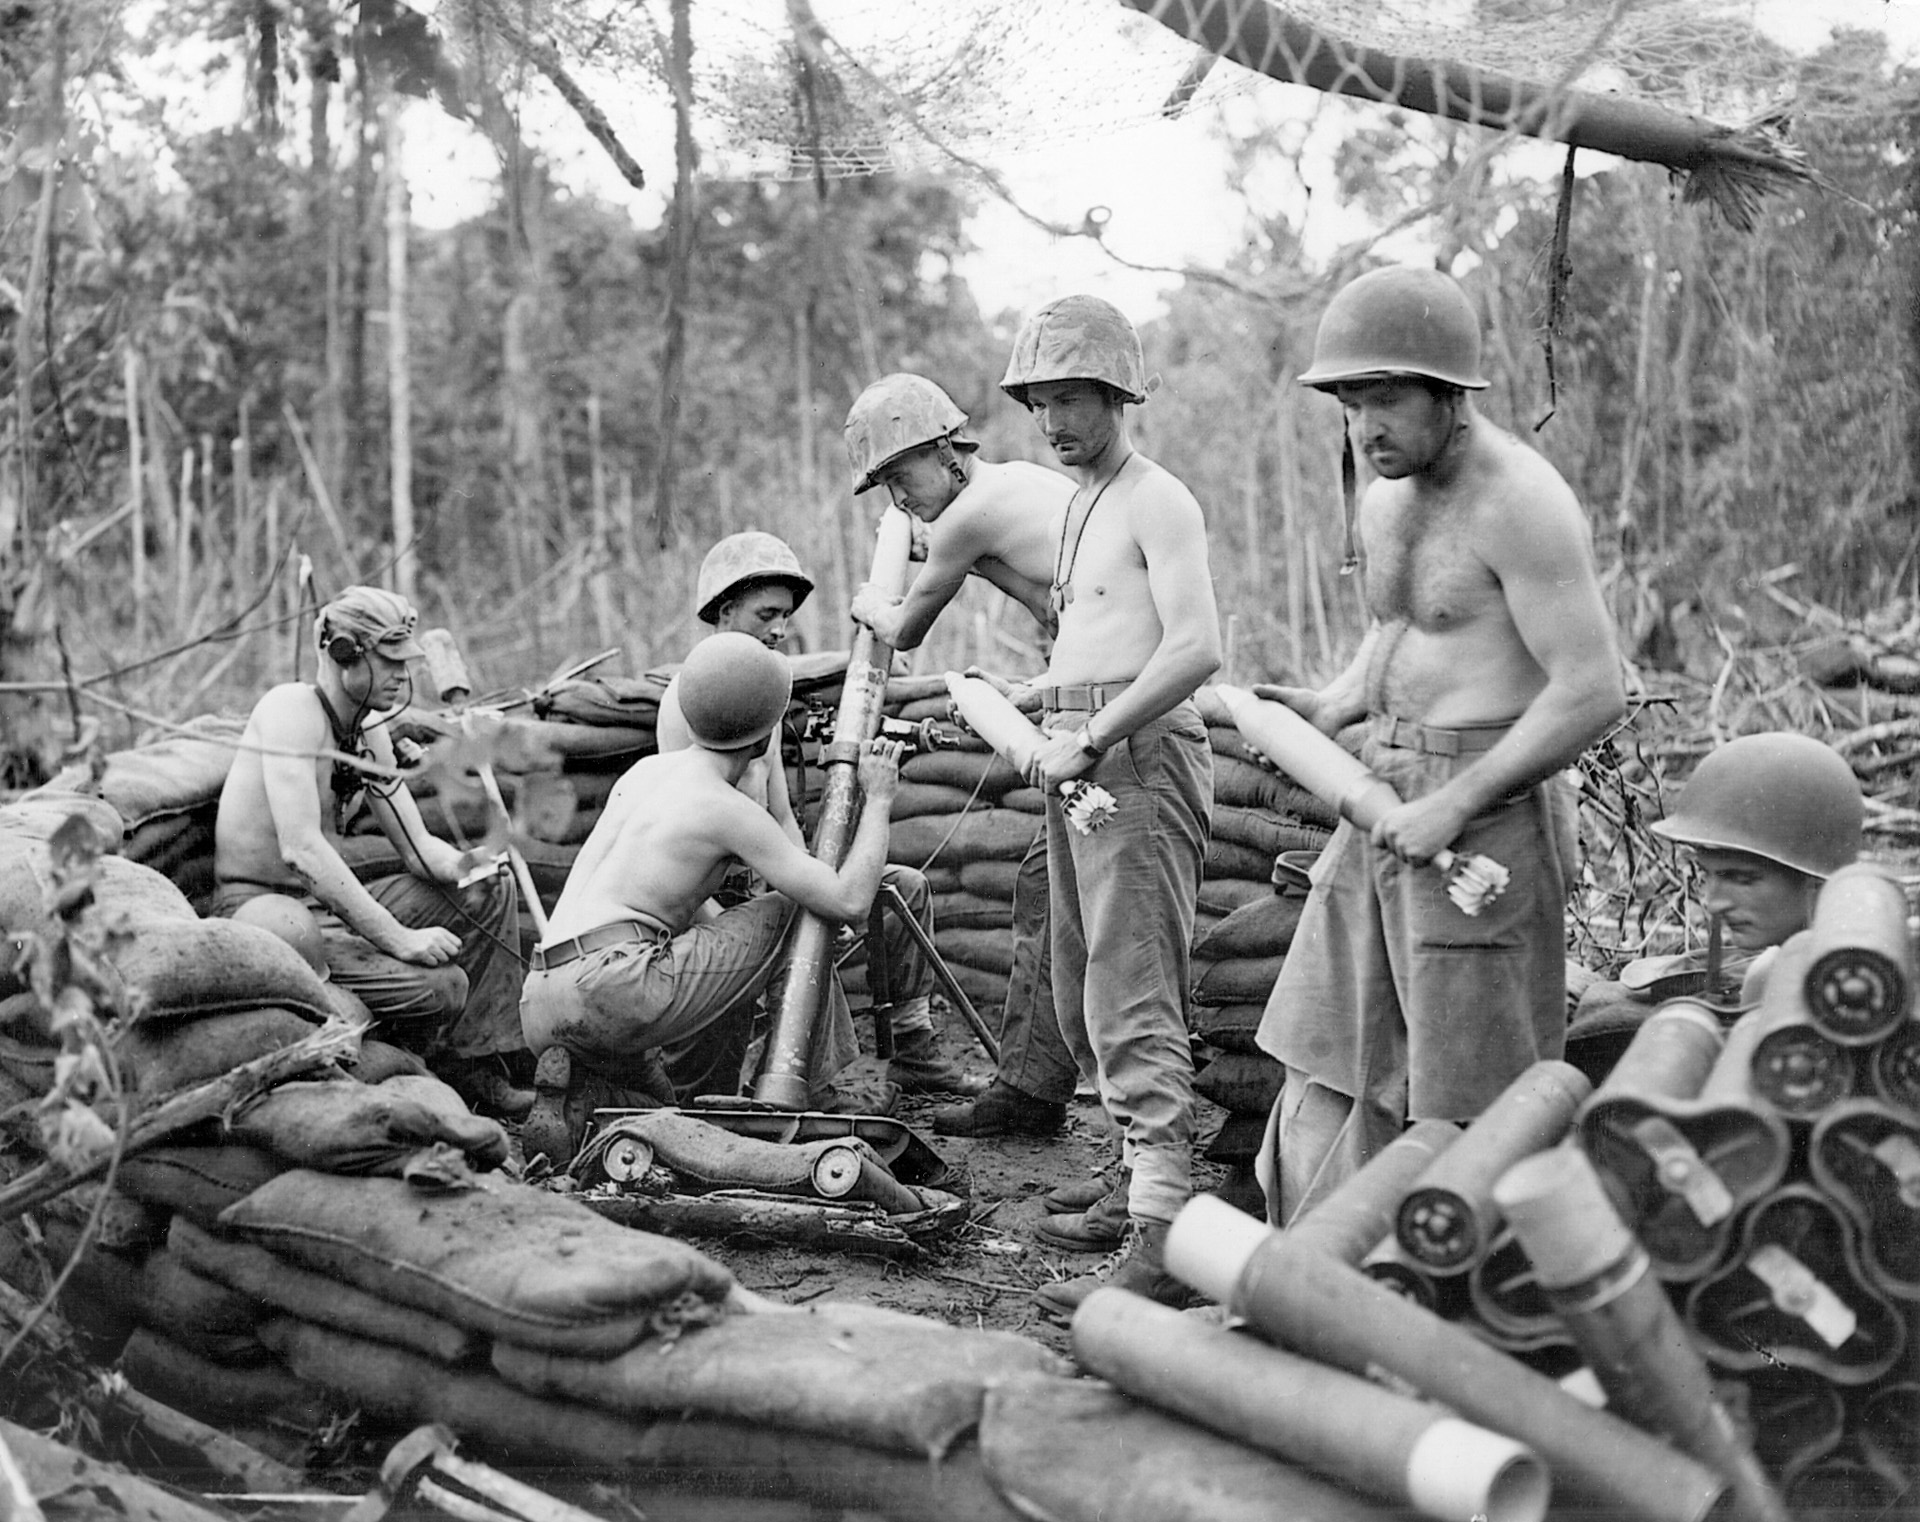 Their 81mm mortar in action, Marines pass shells forward during operations on New Guinea in the spring of 1944.